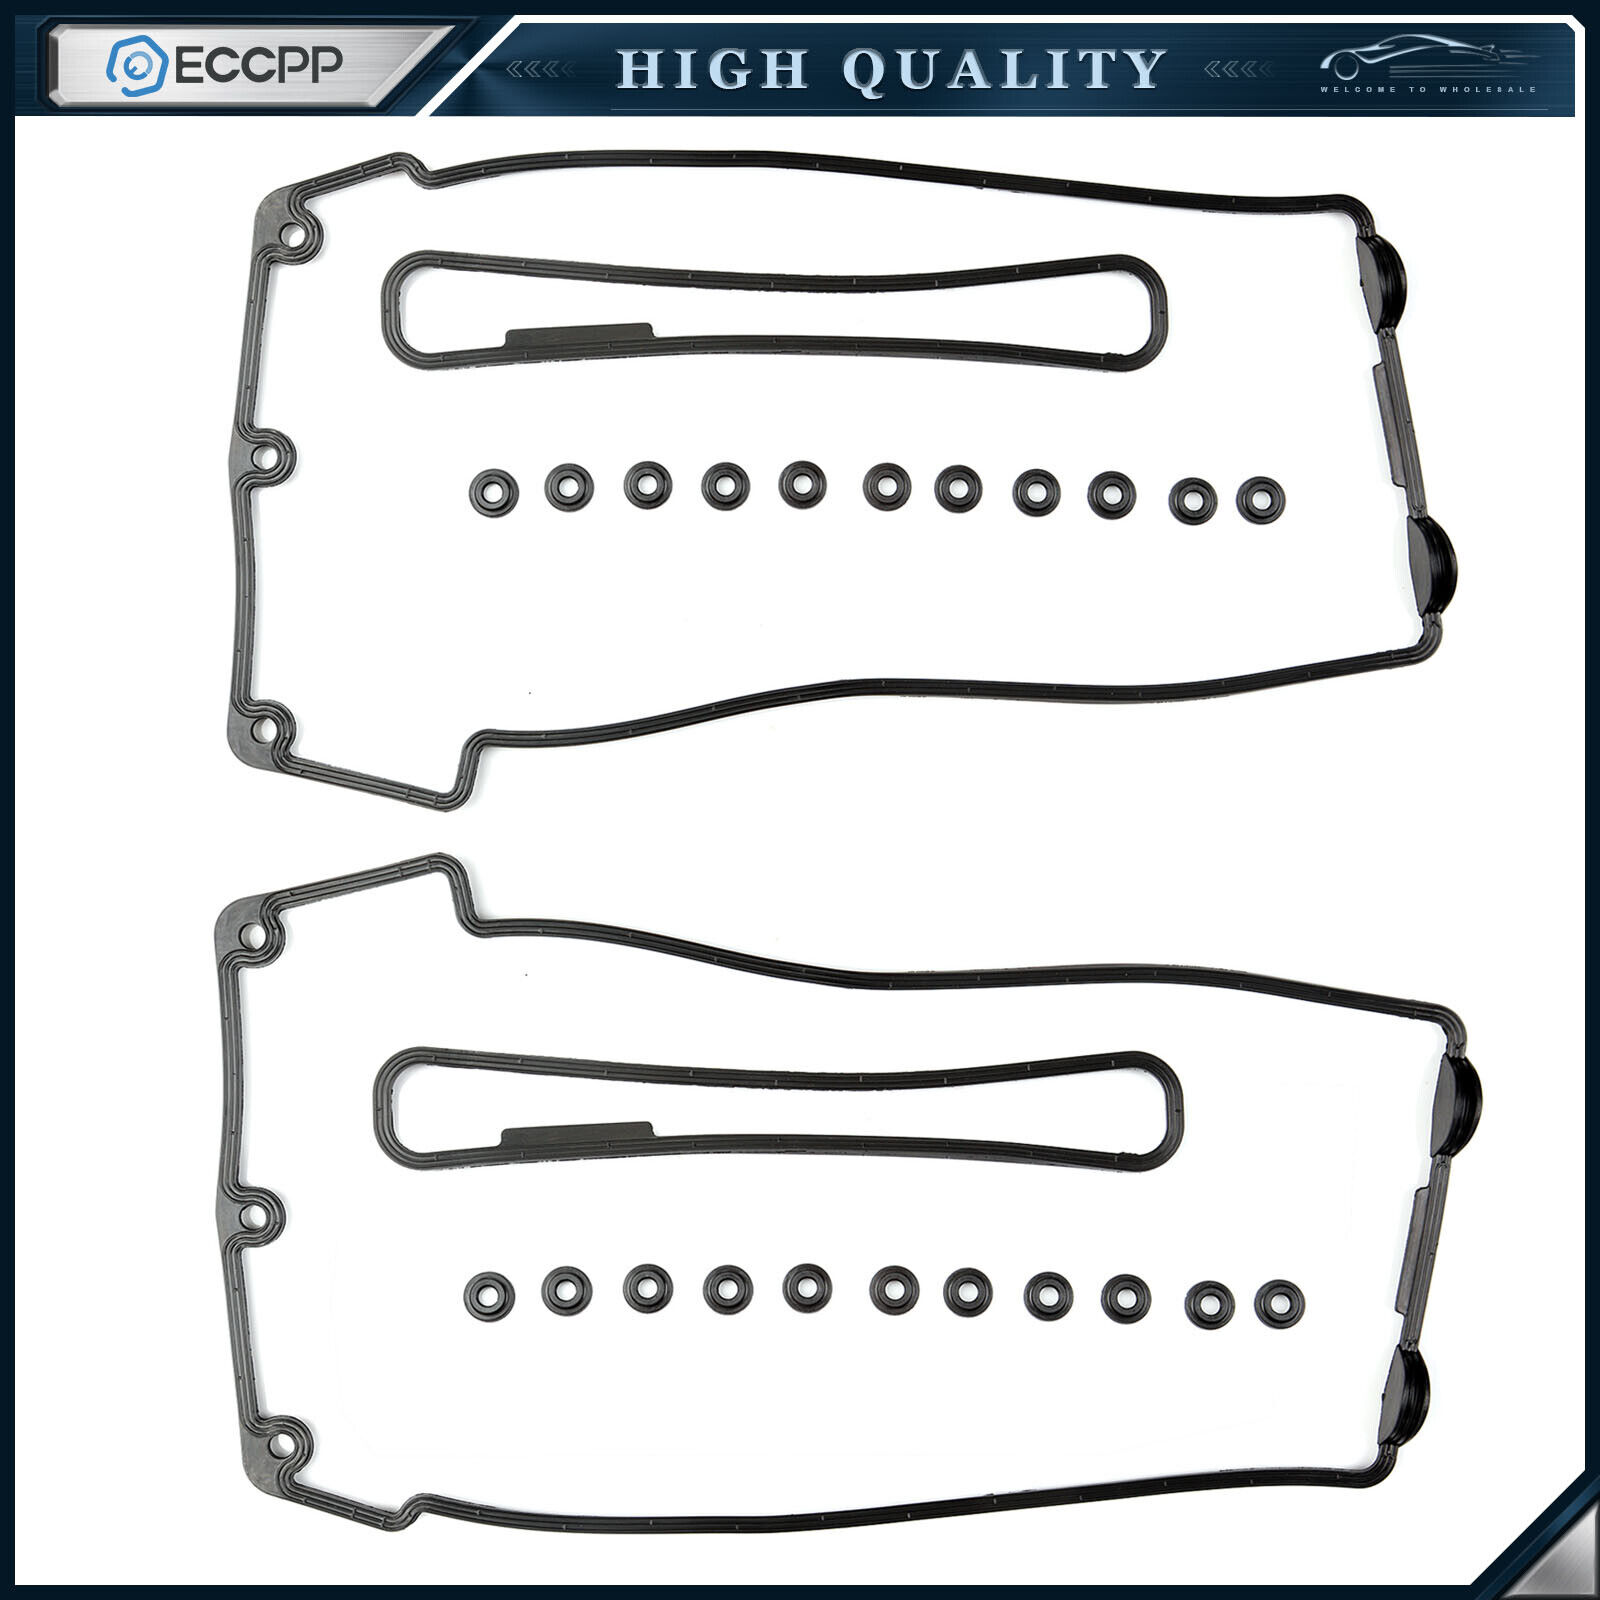 ECCPP Valve Cover Gasket Set For 03-05 BMW X5 540i 740i 740il Z8 Land Rover 4.4L